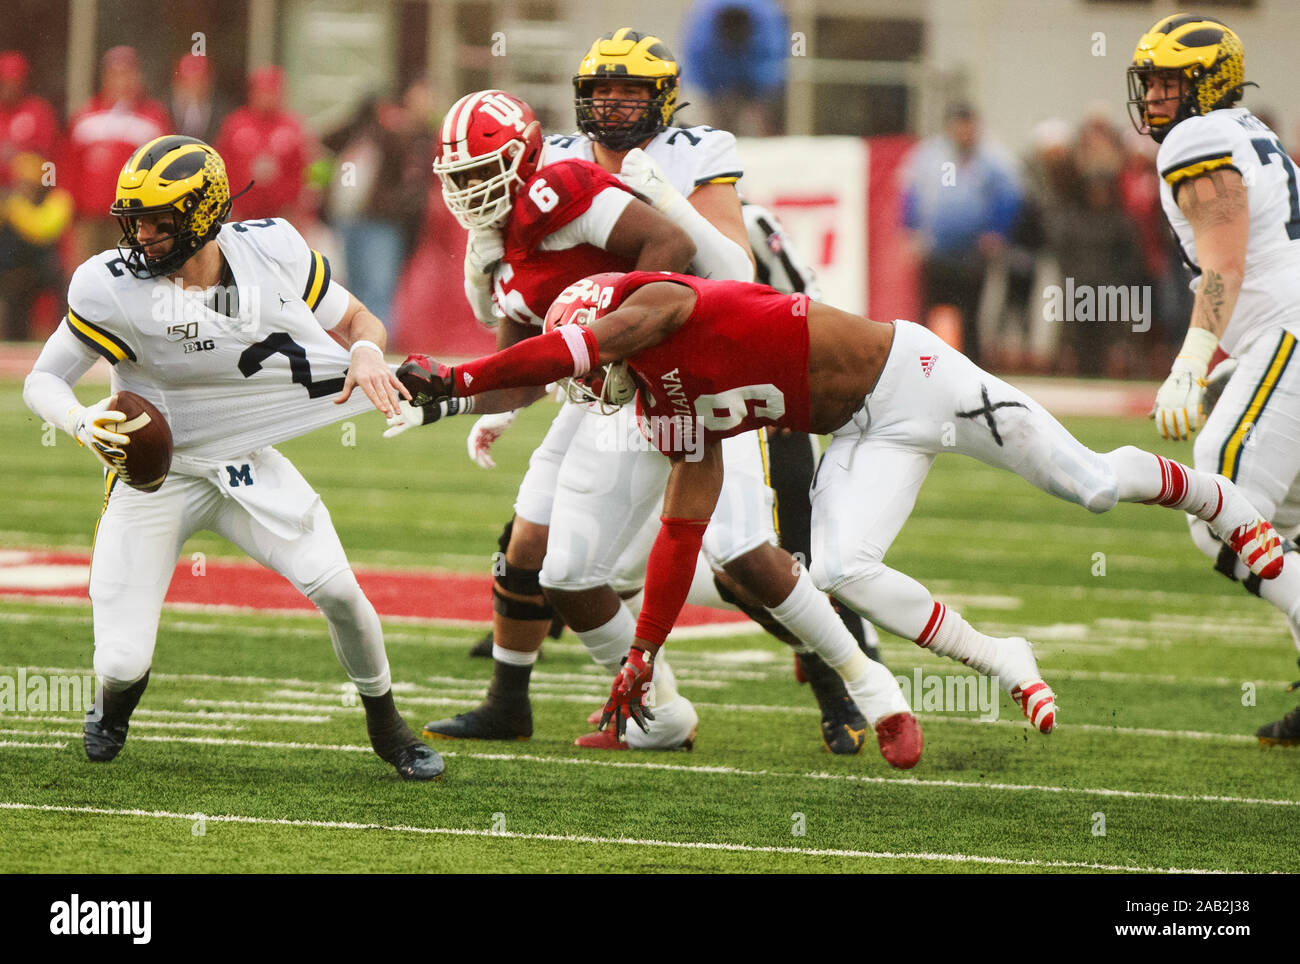 U's Marcelino Ball (9) stops Michigan's Shea Patterson (2) during an NCAA college football game at the Memorial Stadium in Bloomington.(Final score; Indiana University 14:39 Michigan University) Stock Photo